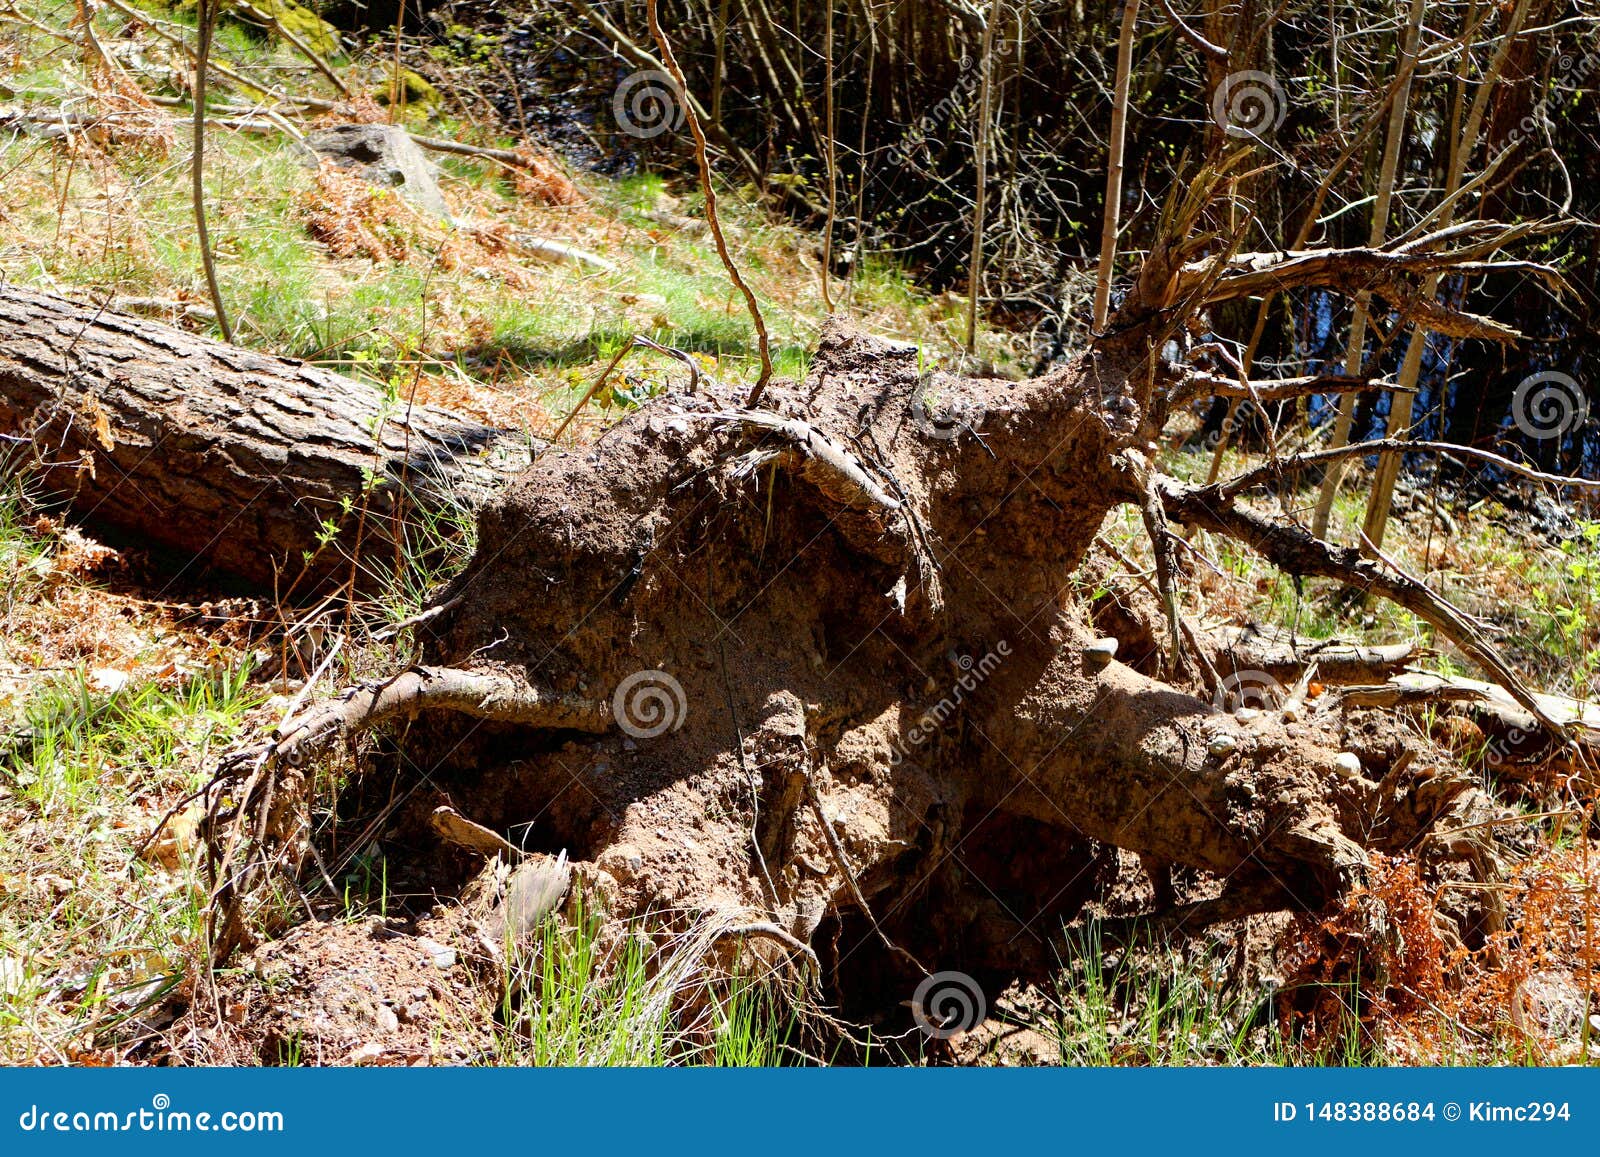 what do you do with root stock fallen tree